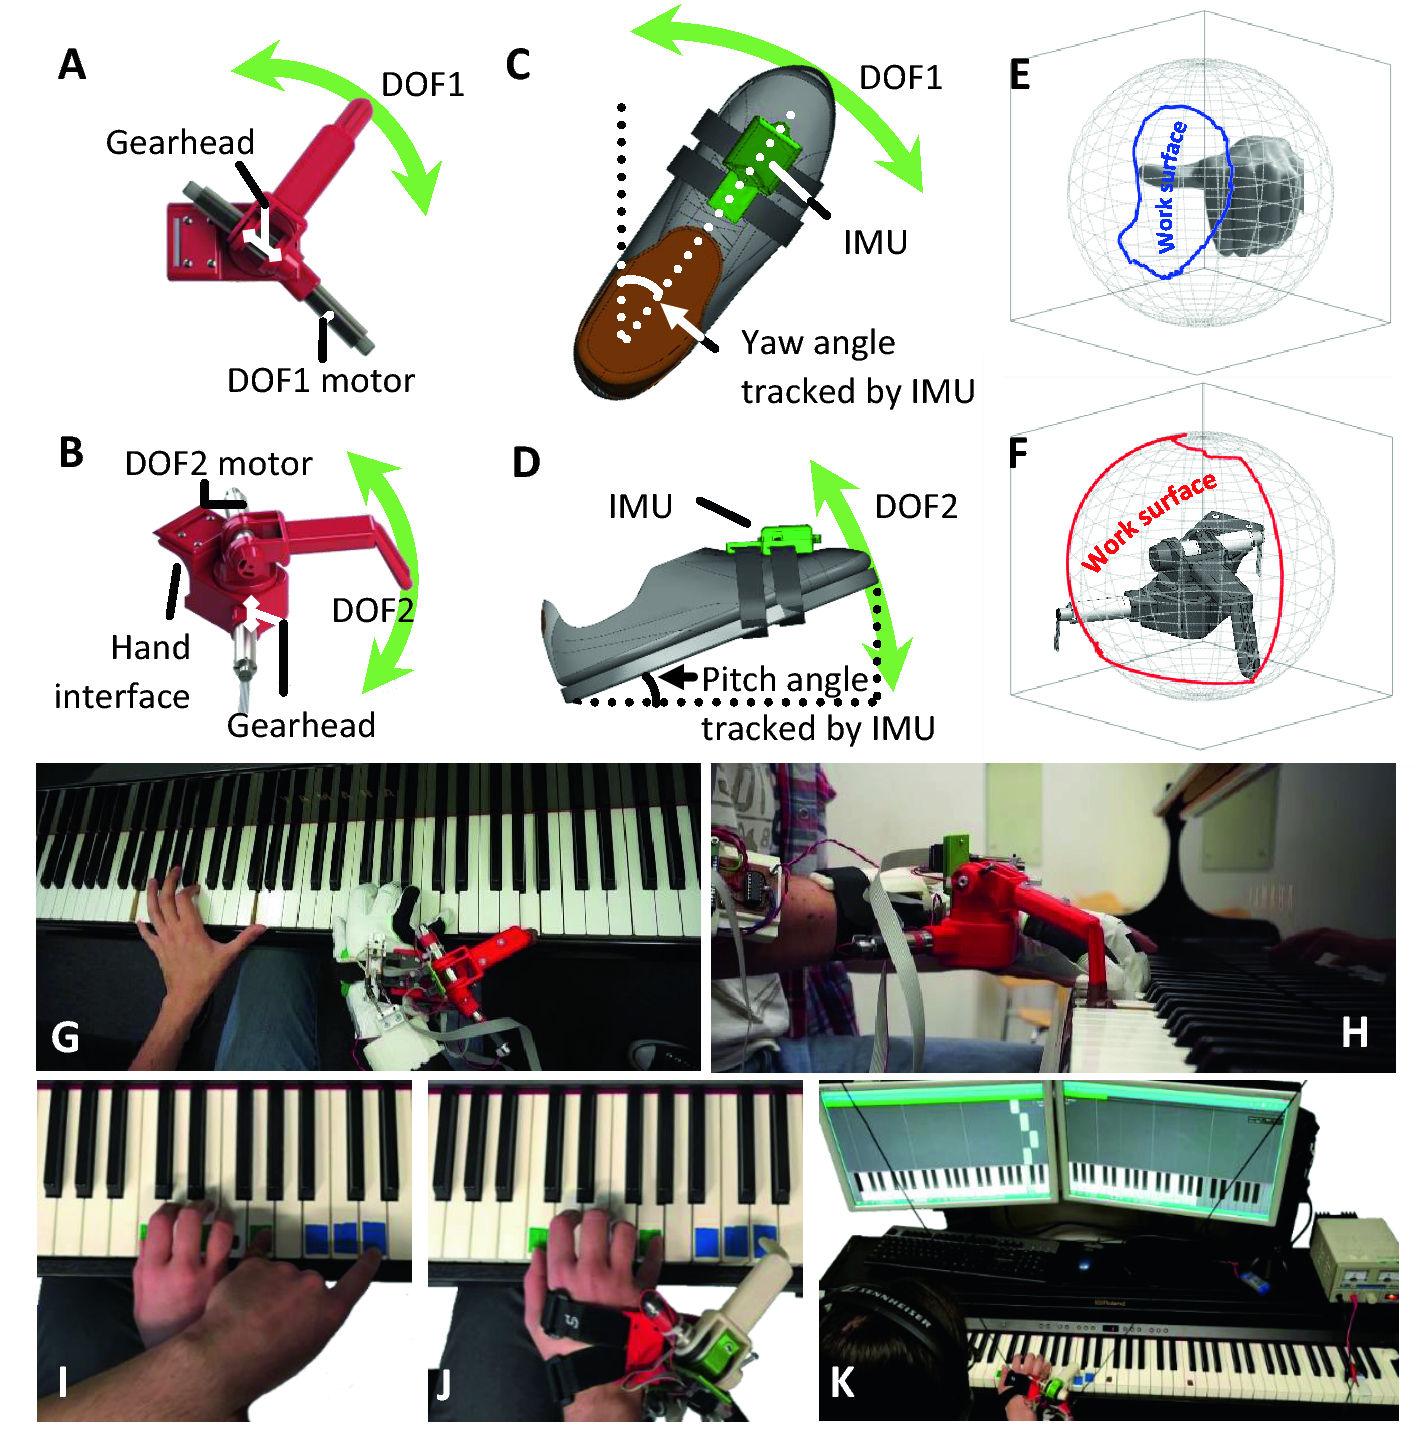 Music and science fusion with lab equipment and instruments